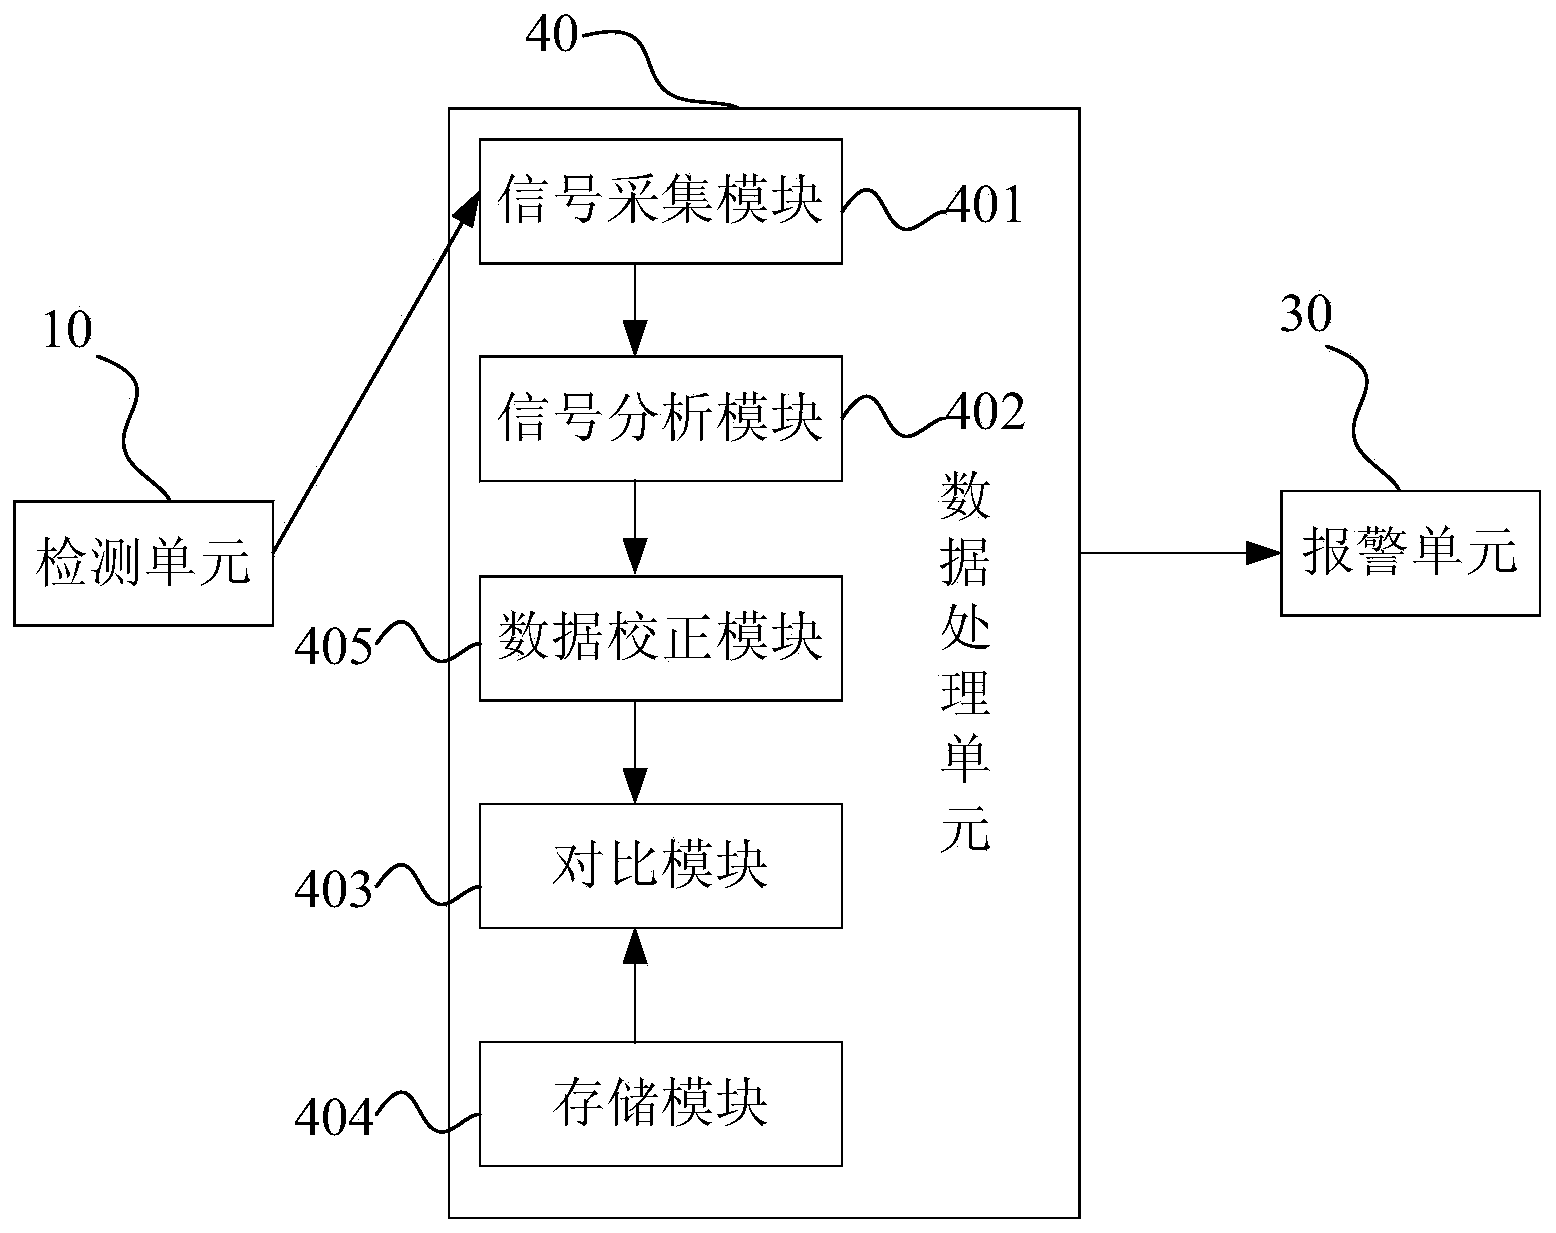 Security inspection device and method for identifying forbidden objects using same